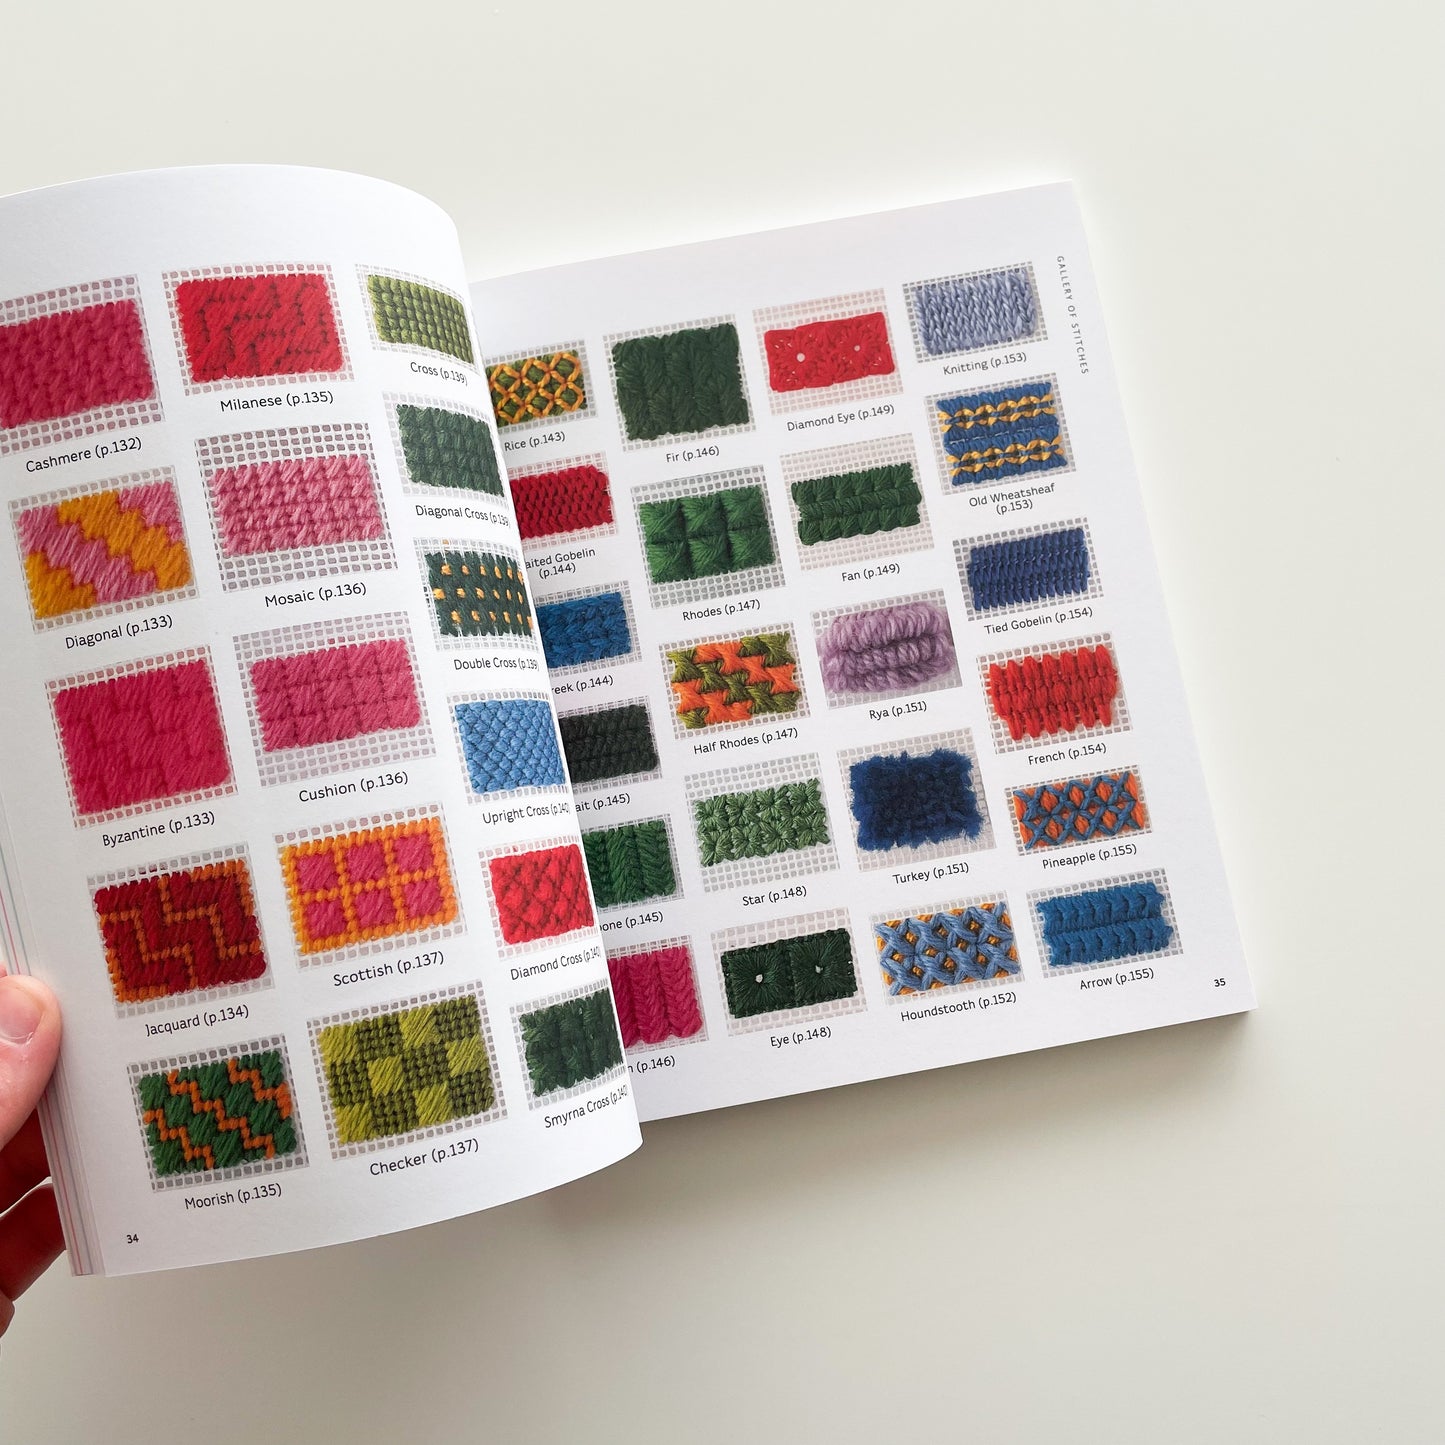 DK Embroidery: The Ideal Guide to Stitching, Whatever Your Level of Expertise